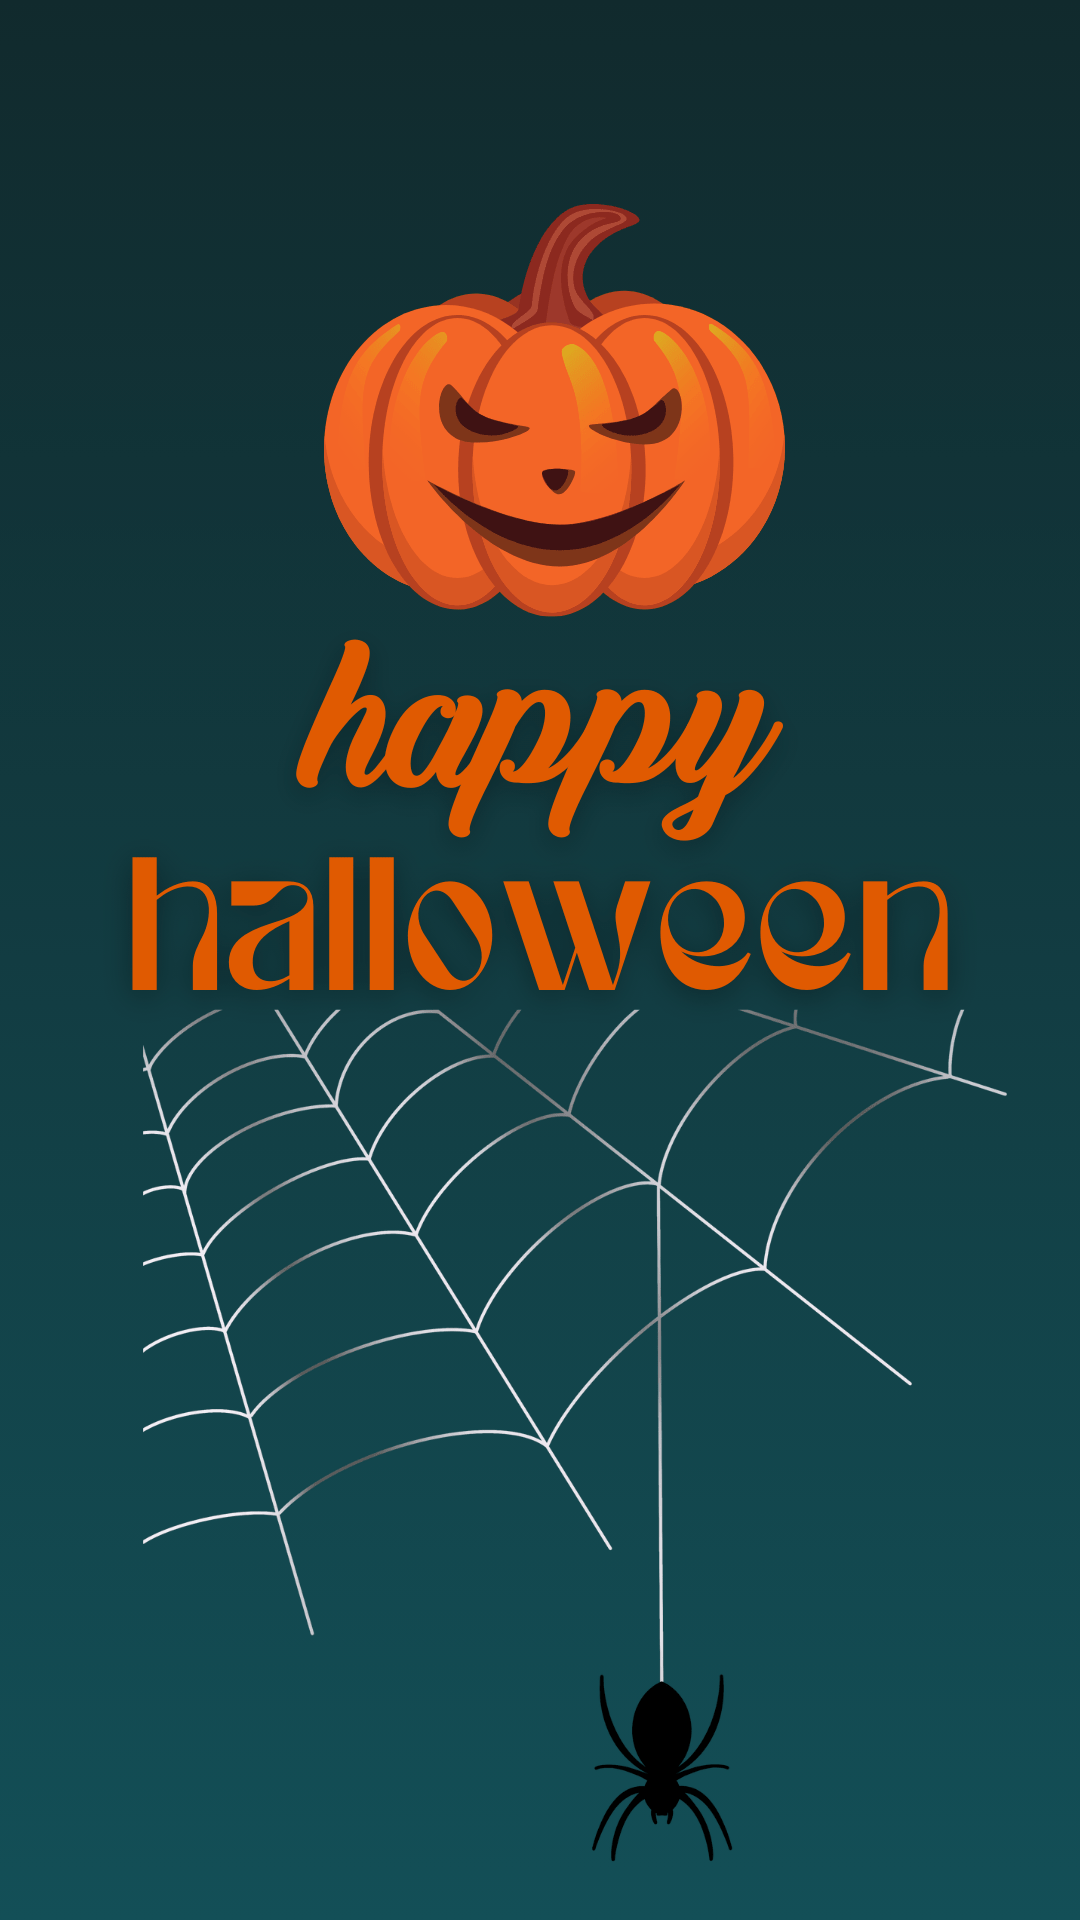 Happy Halloween Image with Pumpkin and Spider - Moonzori Wishes